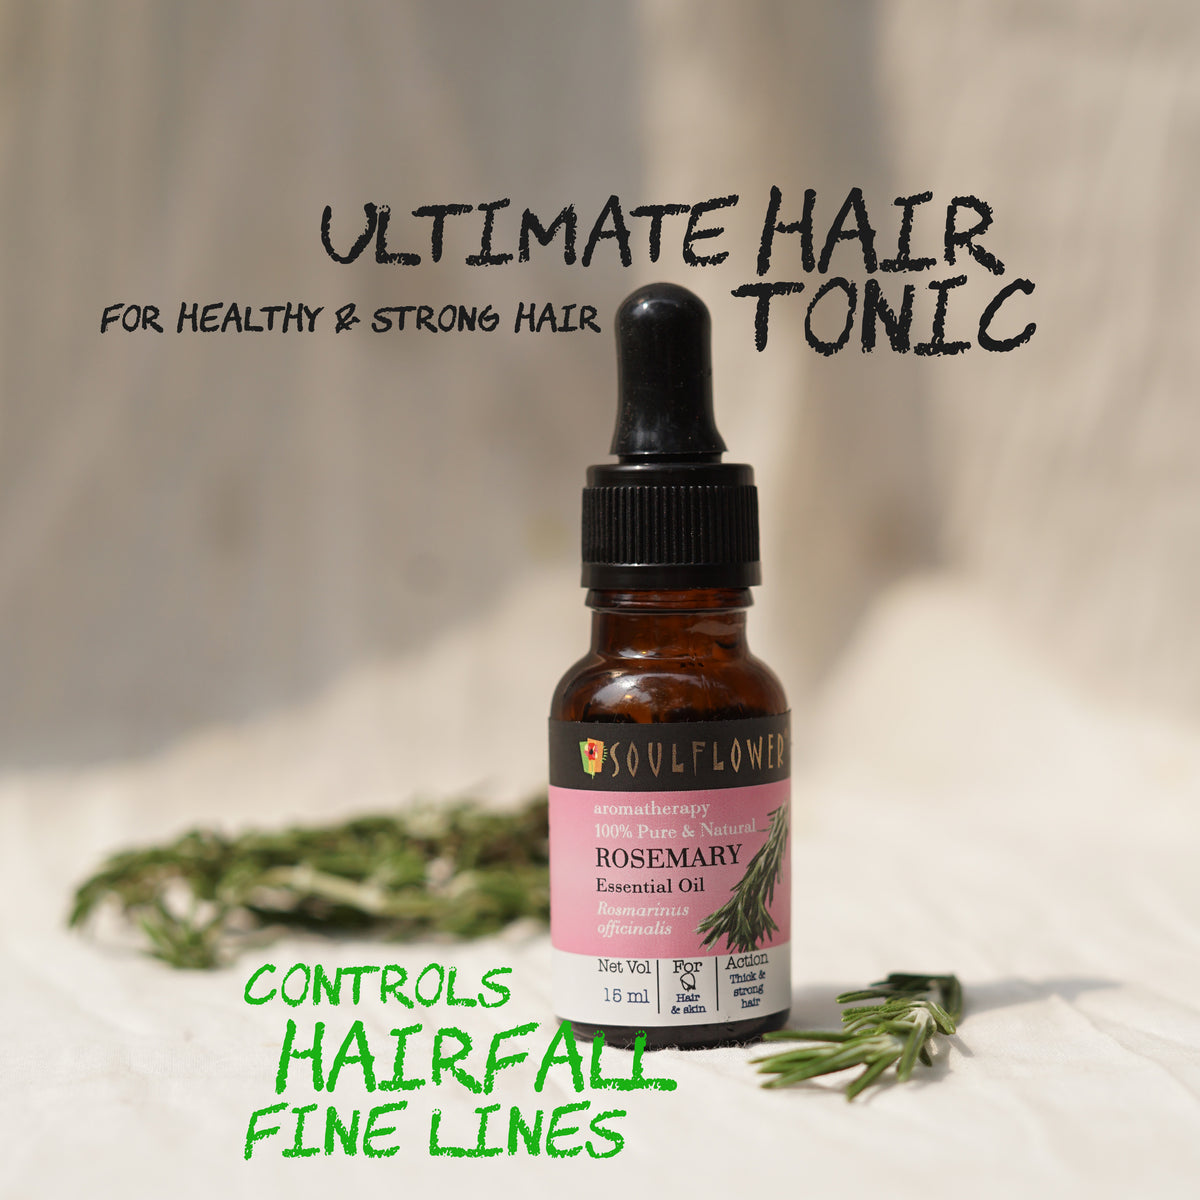 Soulflower rosemary oil for hair growth